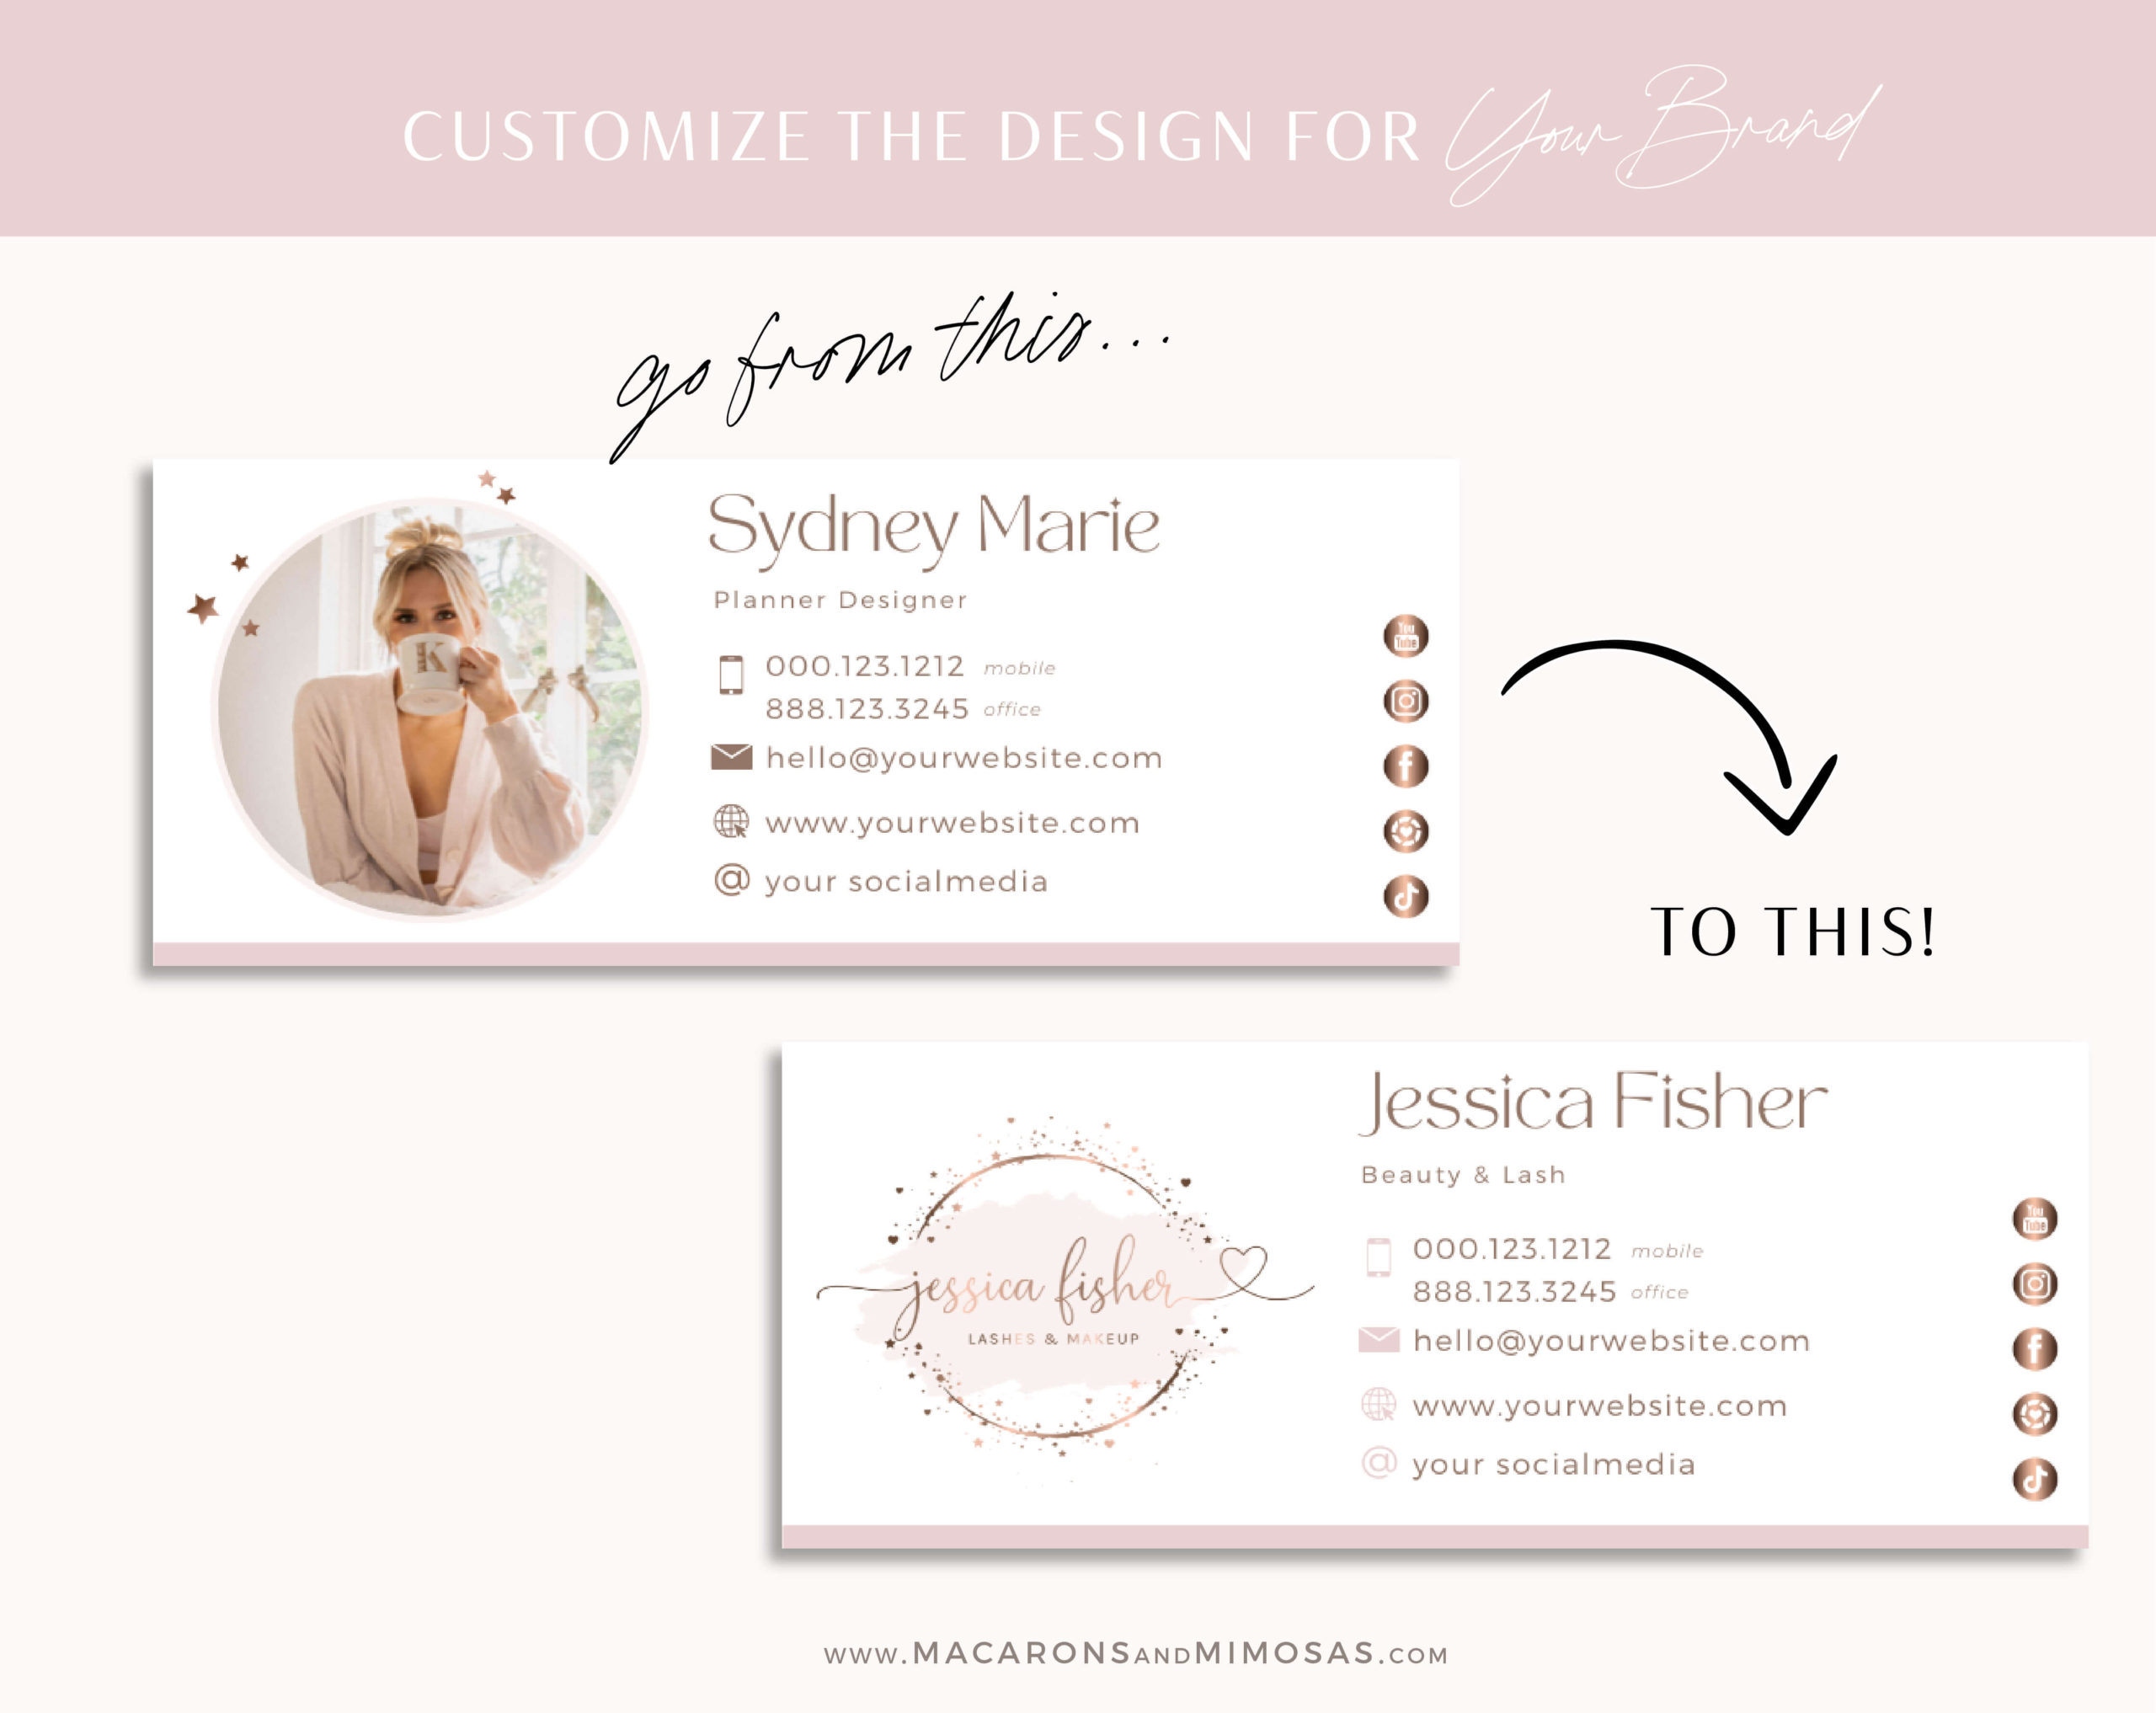 Rose Gold Email Signature Template with Logo, Minimalist, Best Seller Realtor Marketing Tool, Professional Signature, Contact Card Design